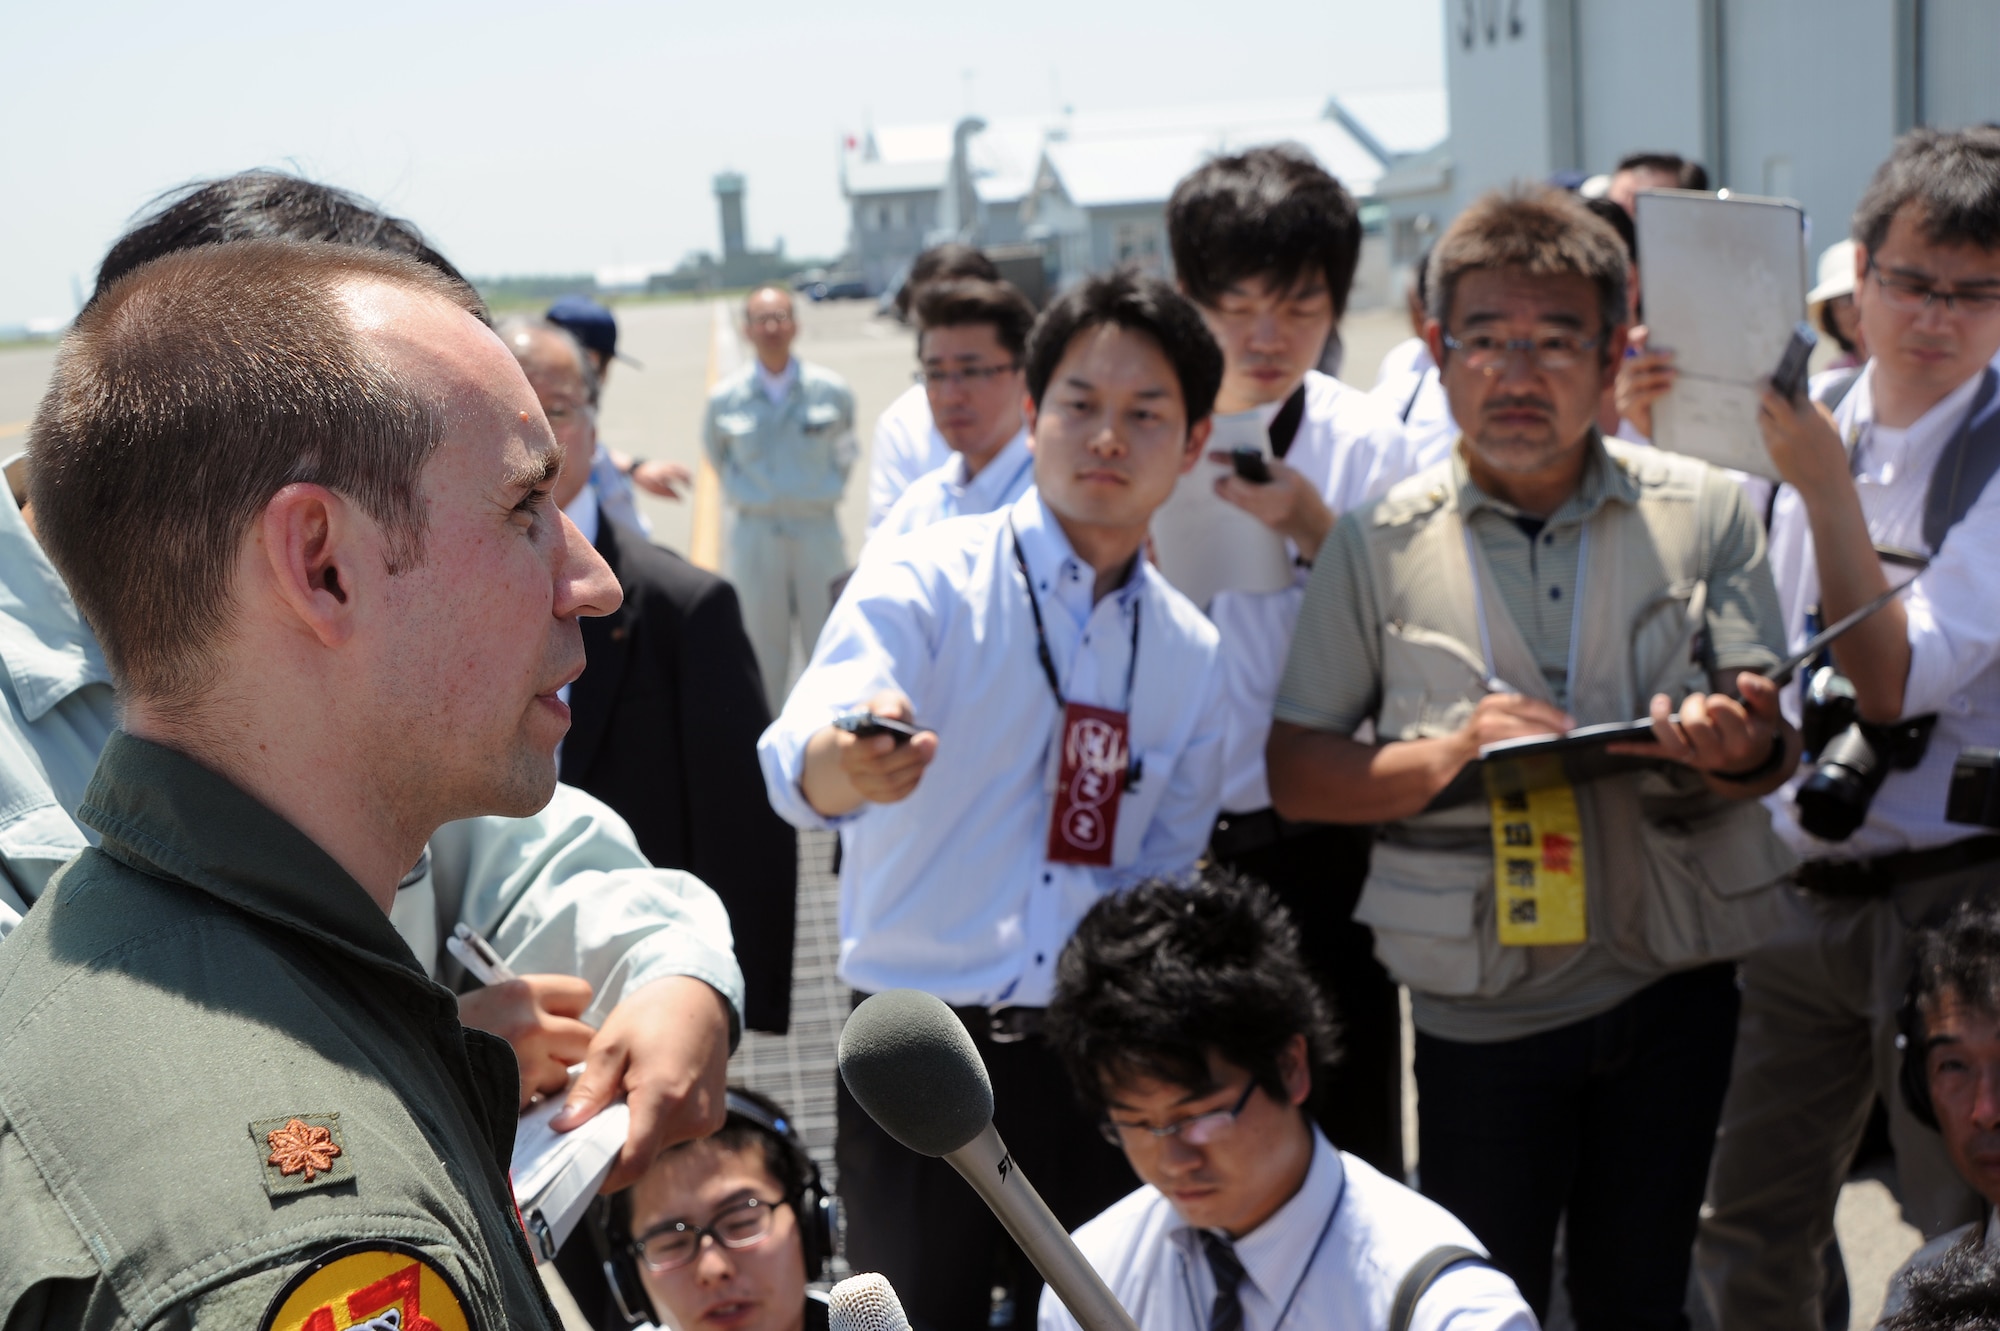 Maj. Jason Mascetta, 13th Fighter Squadron assistant director of operations, fields question from Japanese media members on the flight line at Chitose Air Base, Japan, July 8, 2013. More than 50 members of local city councils and press gathered to gain a better understanding of the training taking place between Airmen from 35th Fighter Wing and the Japan Air Self-Defense Force. (U.S. Air Force photo/Senior Airman Derek VanHorn)